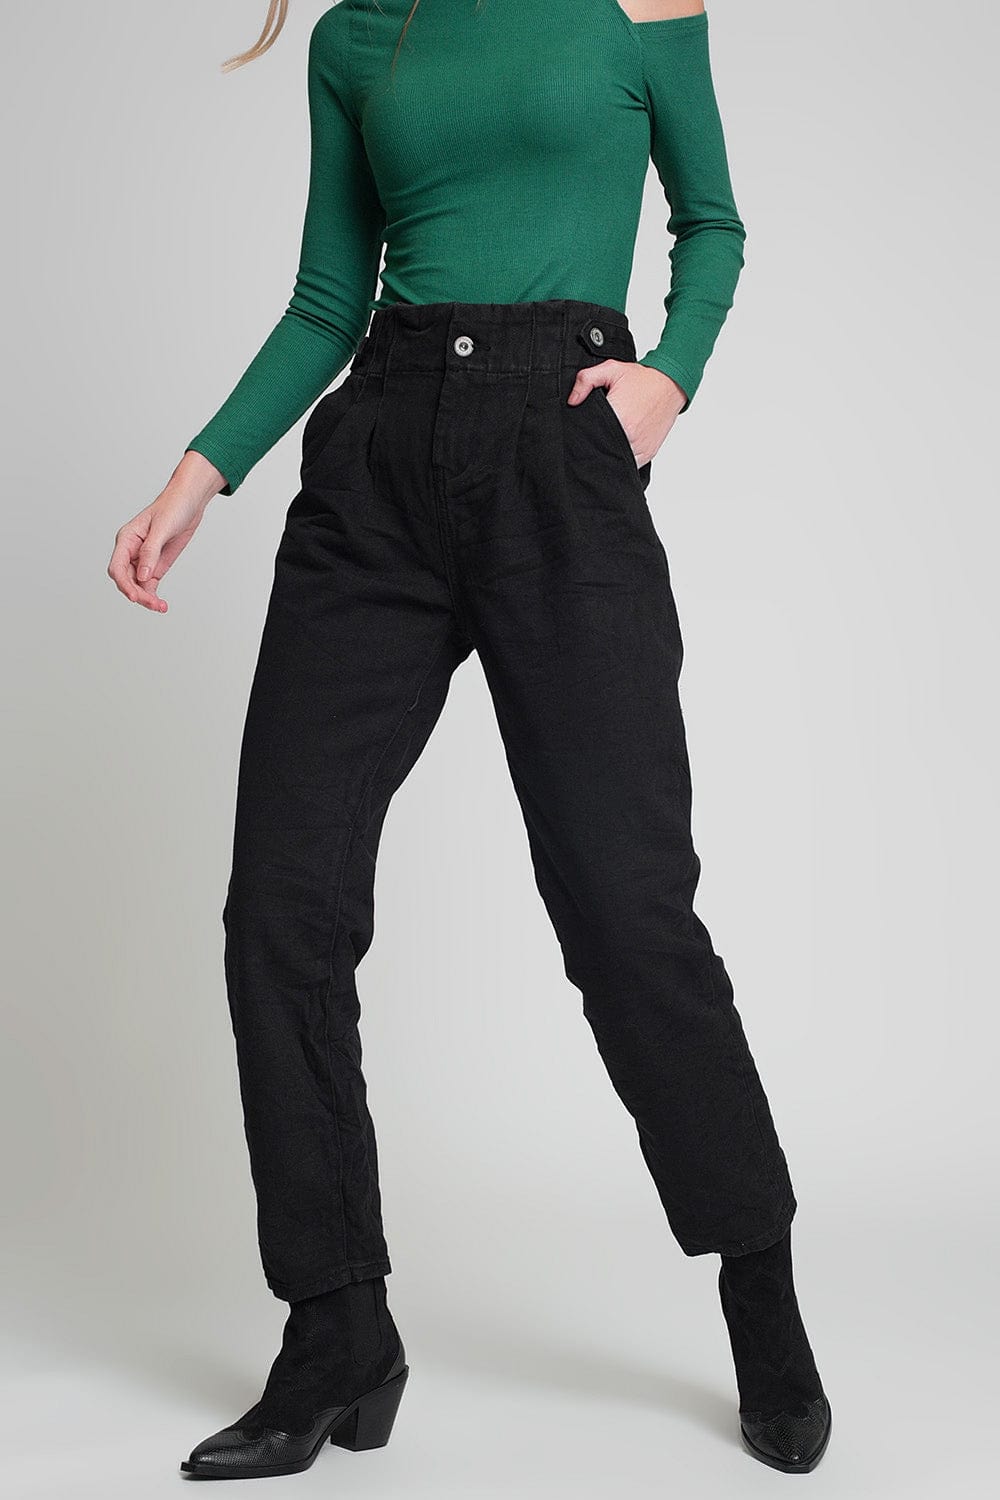 Q2 Women's Pants & Trousers Jeans with Paper Bag Waist and Button Details in Black